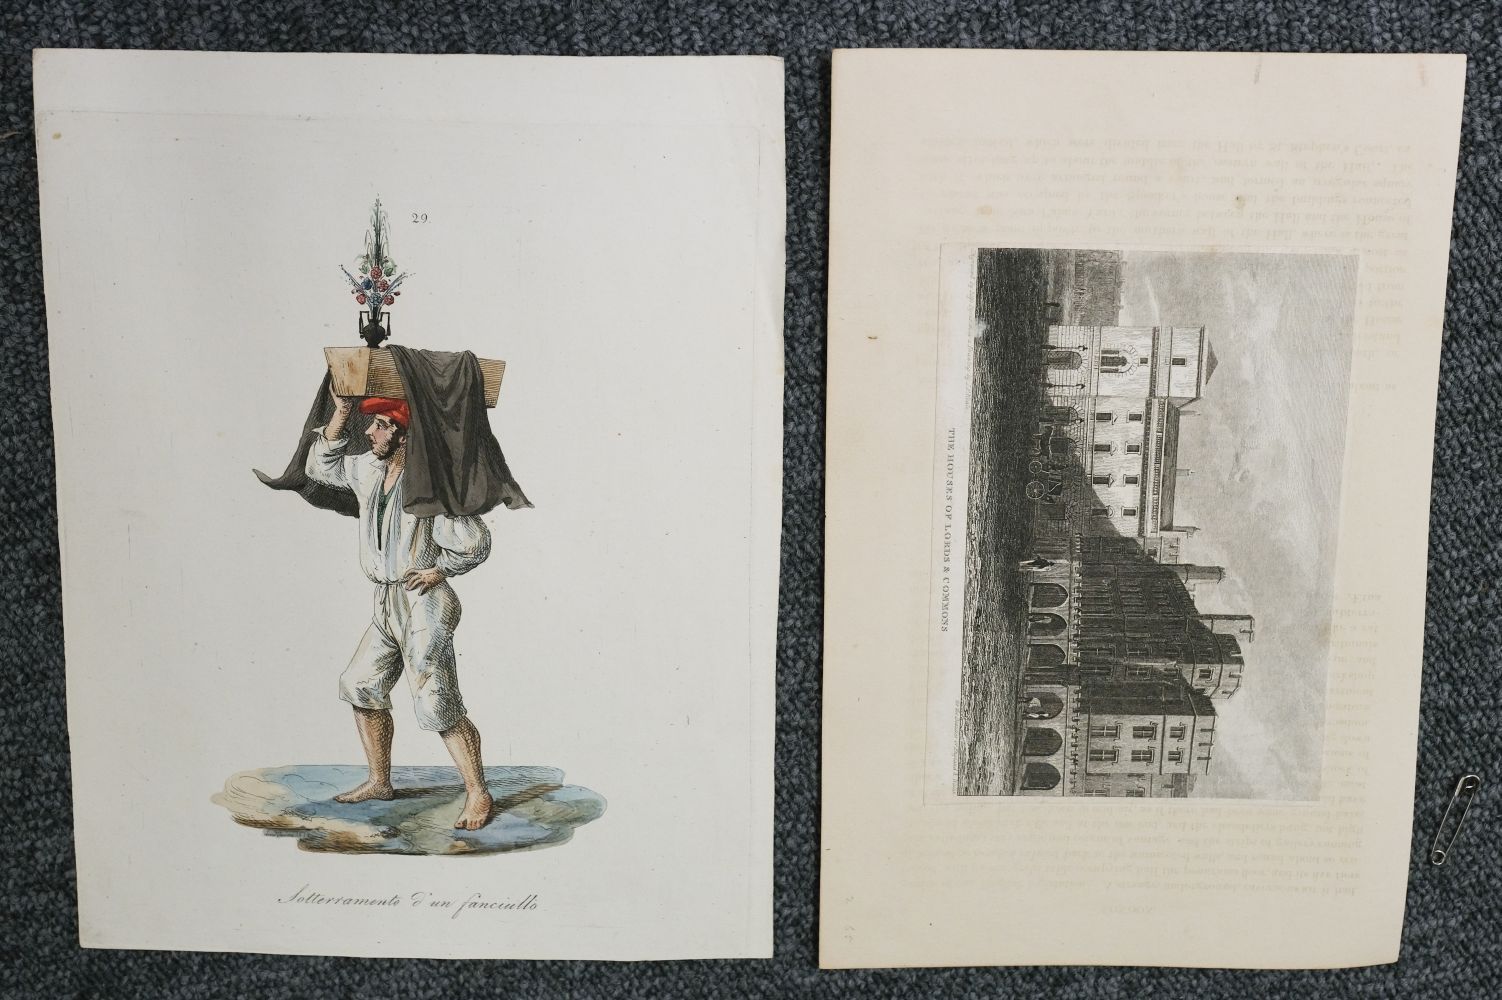 Prints & Engravings. A collection of approximately 650 prints, 18th & 19th century - Image 7 of 9